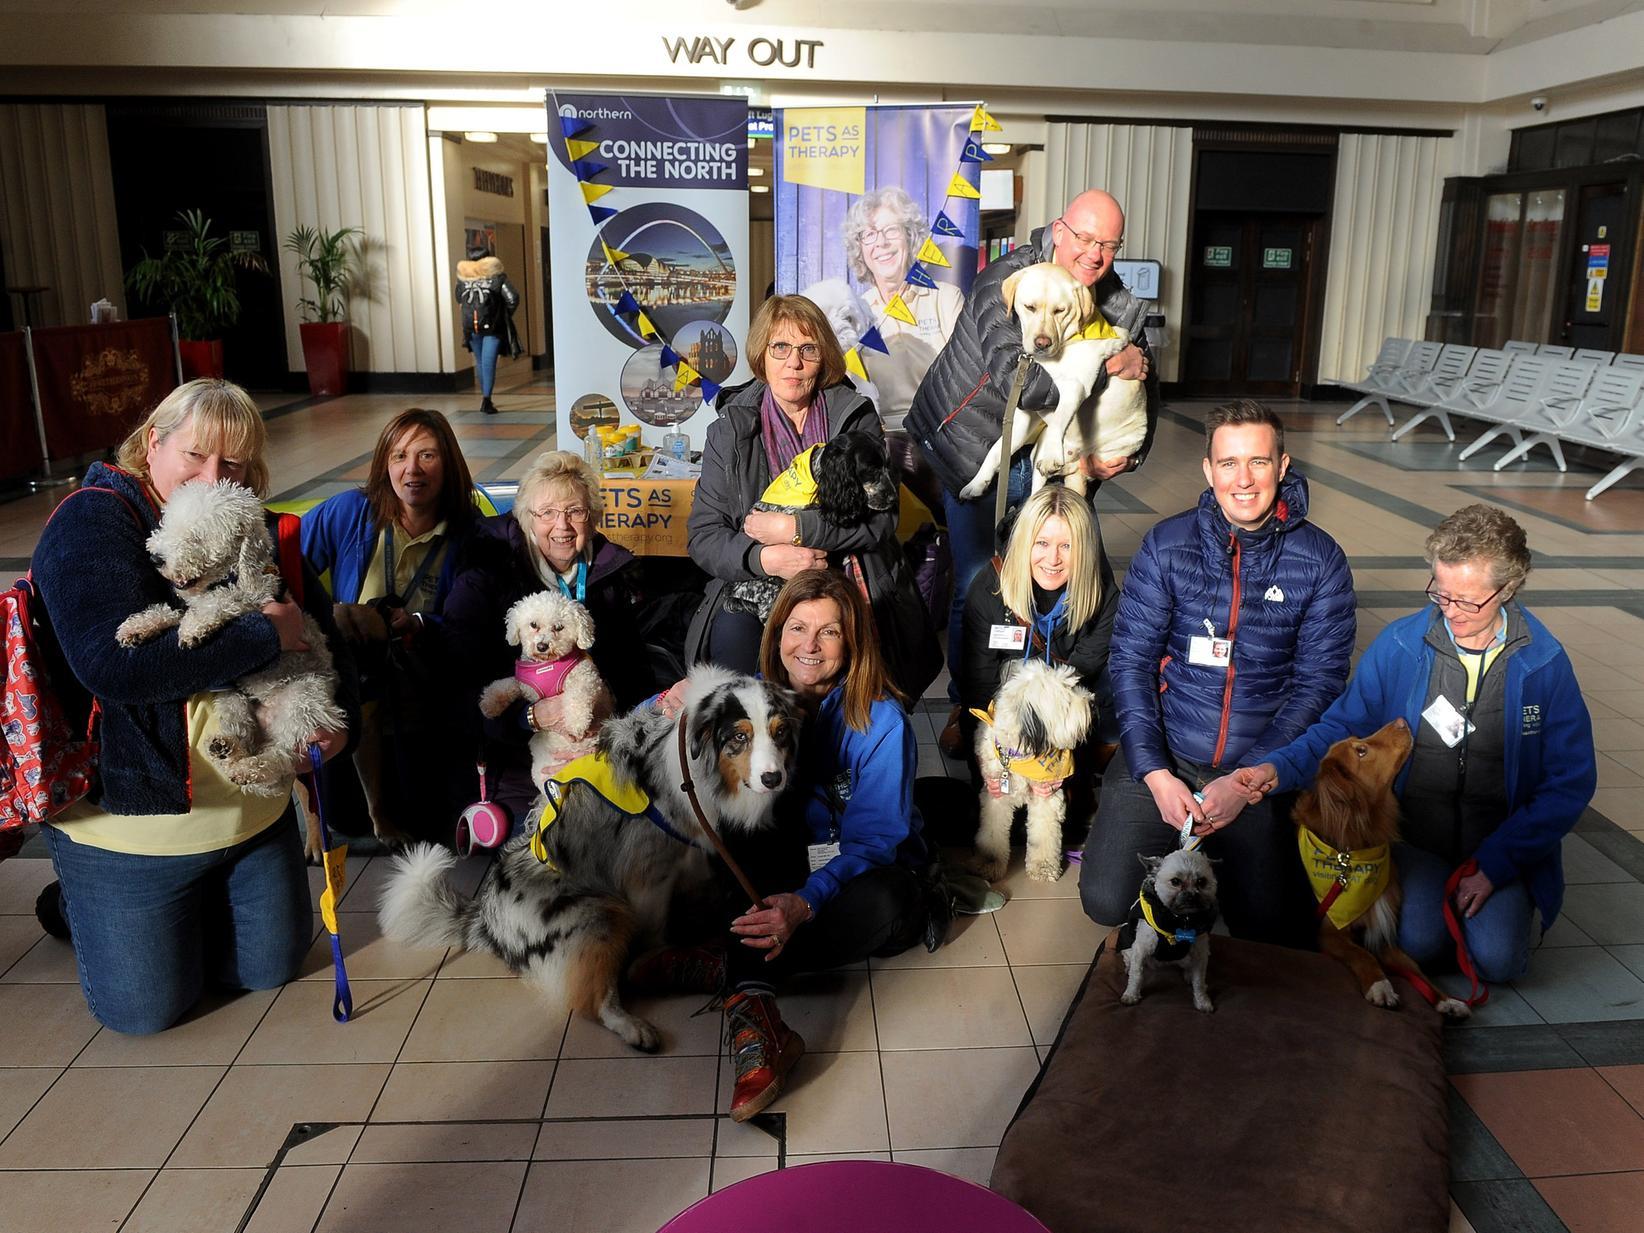 The dogs werethere as part of a collaboration between Pets As Therapy and train operator Northern.